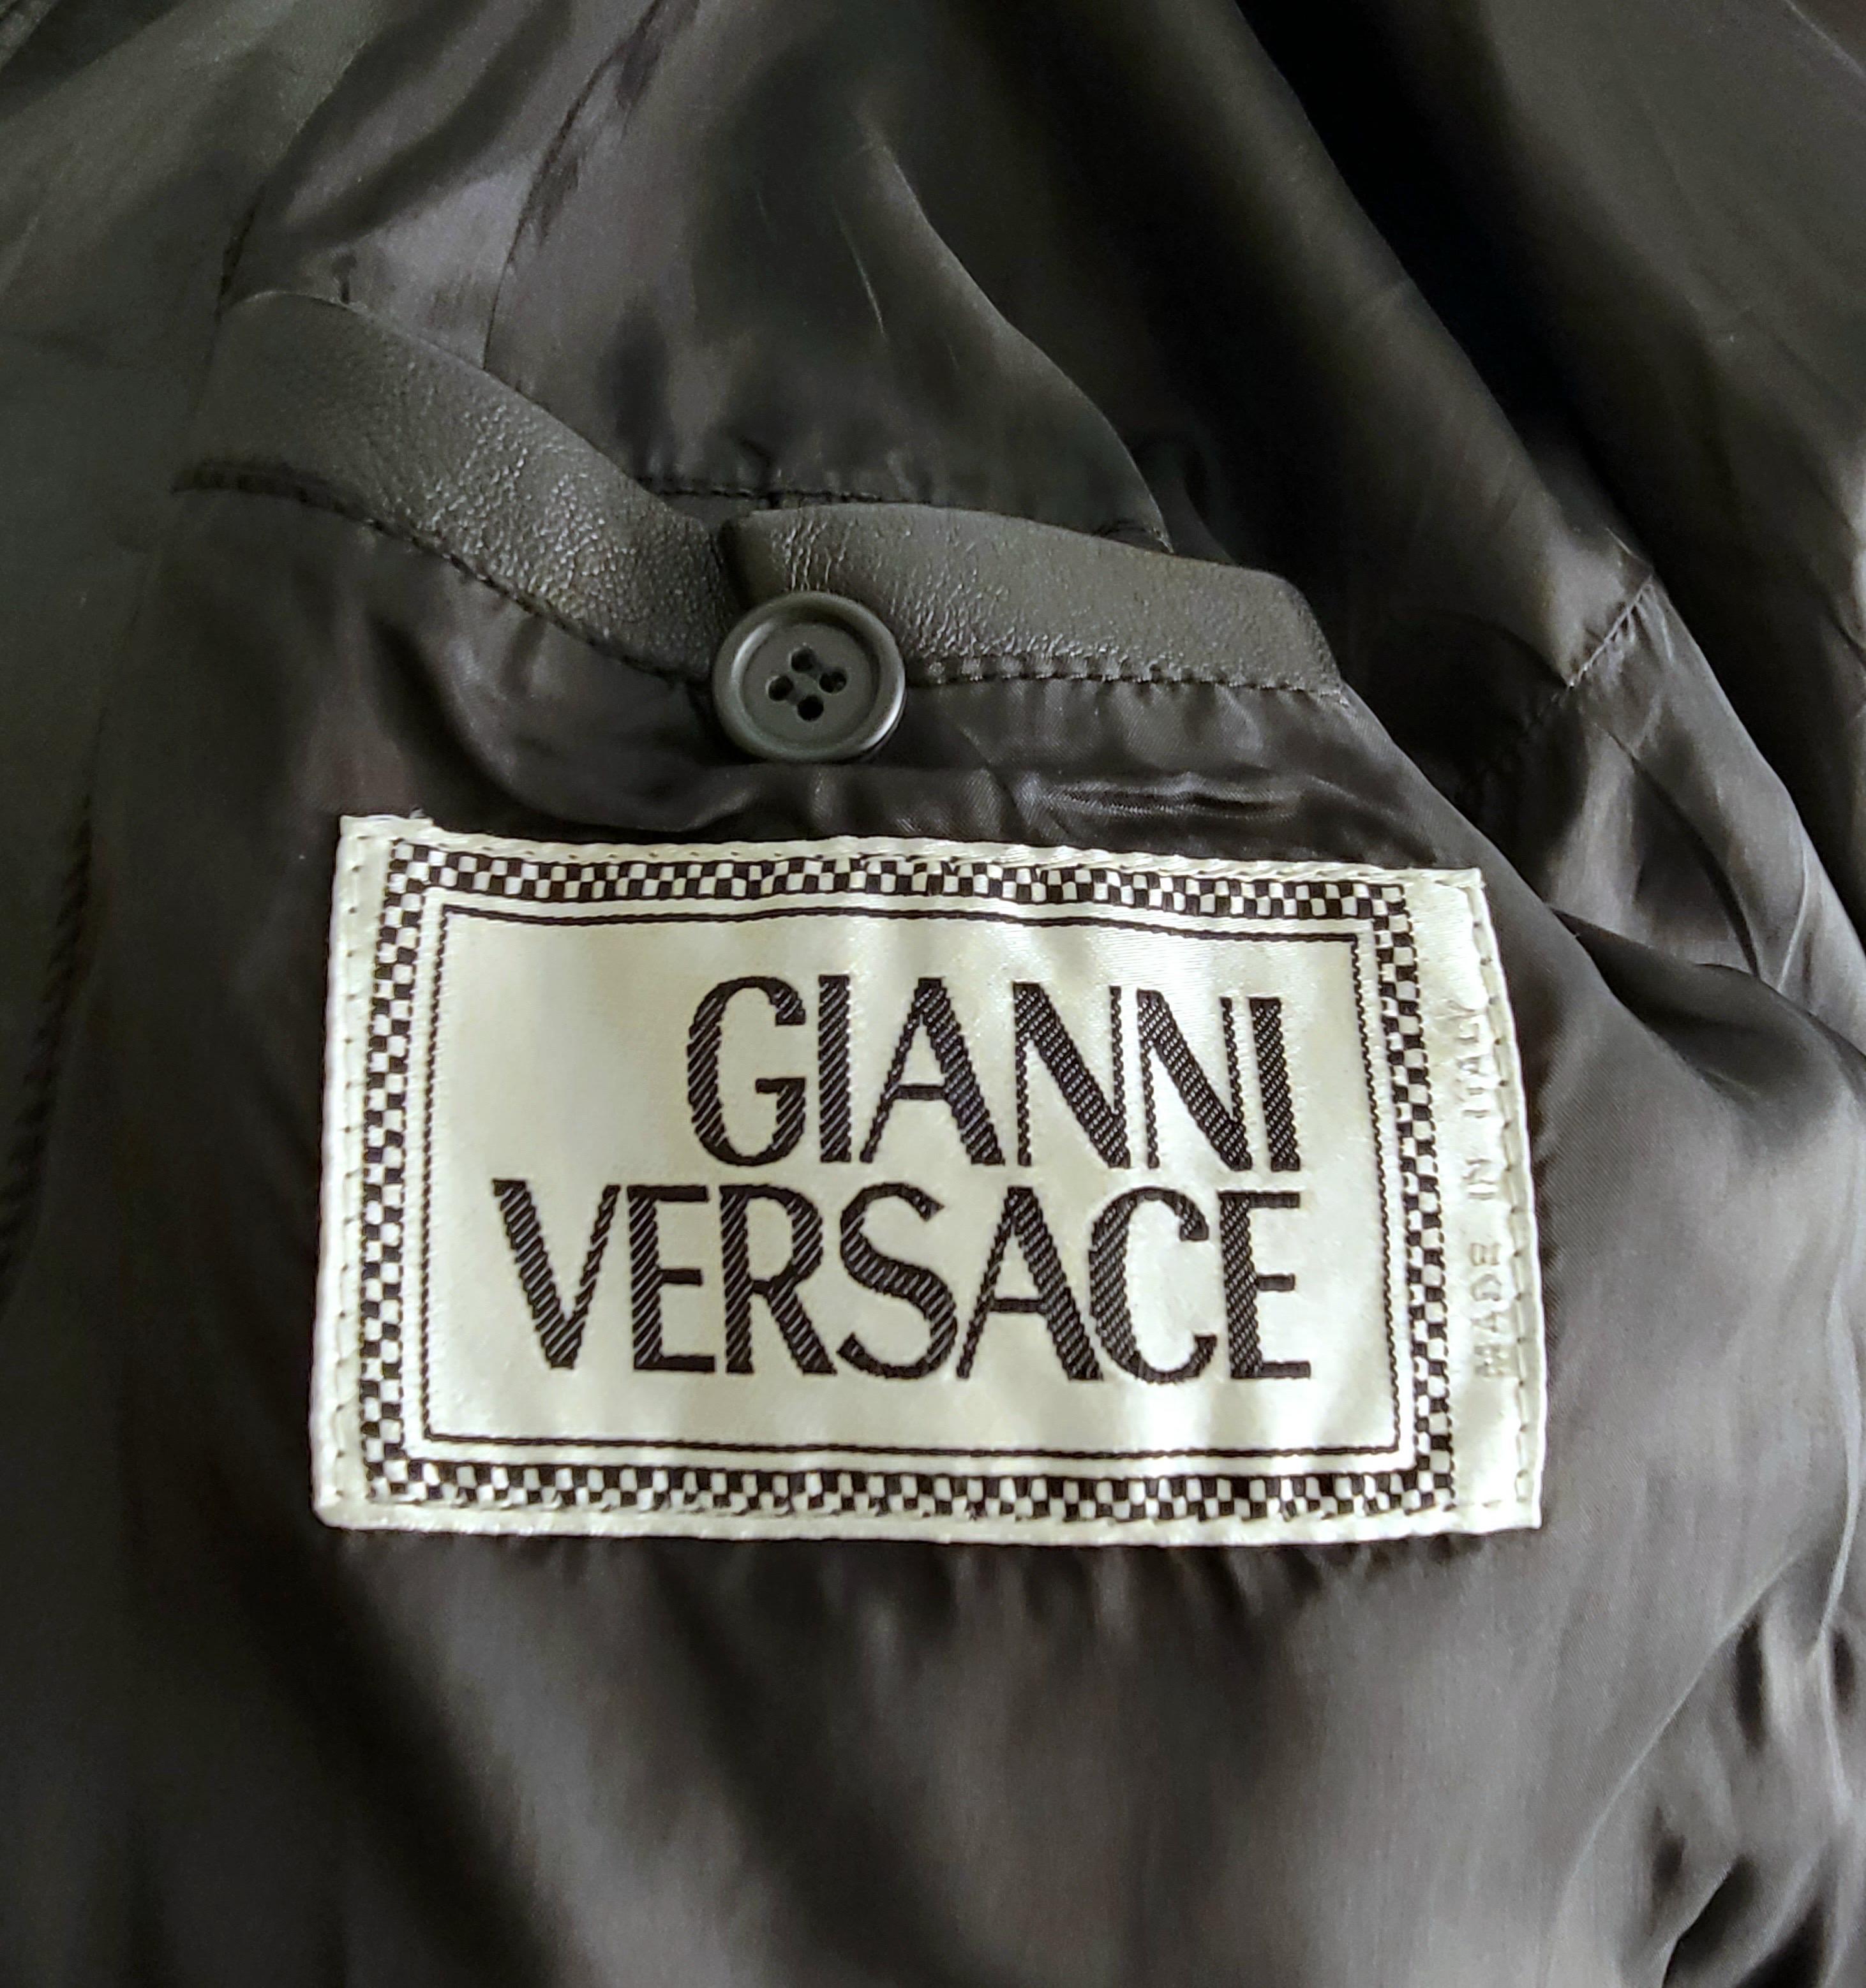 S/S 1992 Gianni Versace Greek Key Studded Leather Jacket For Sale 2